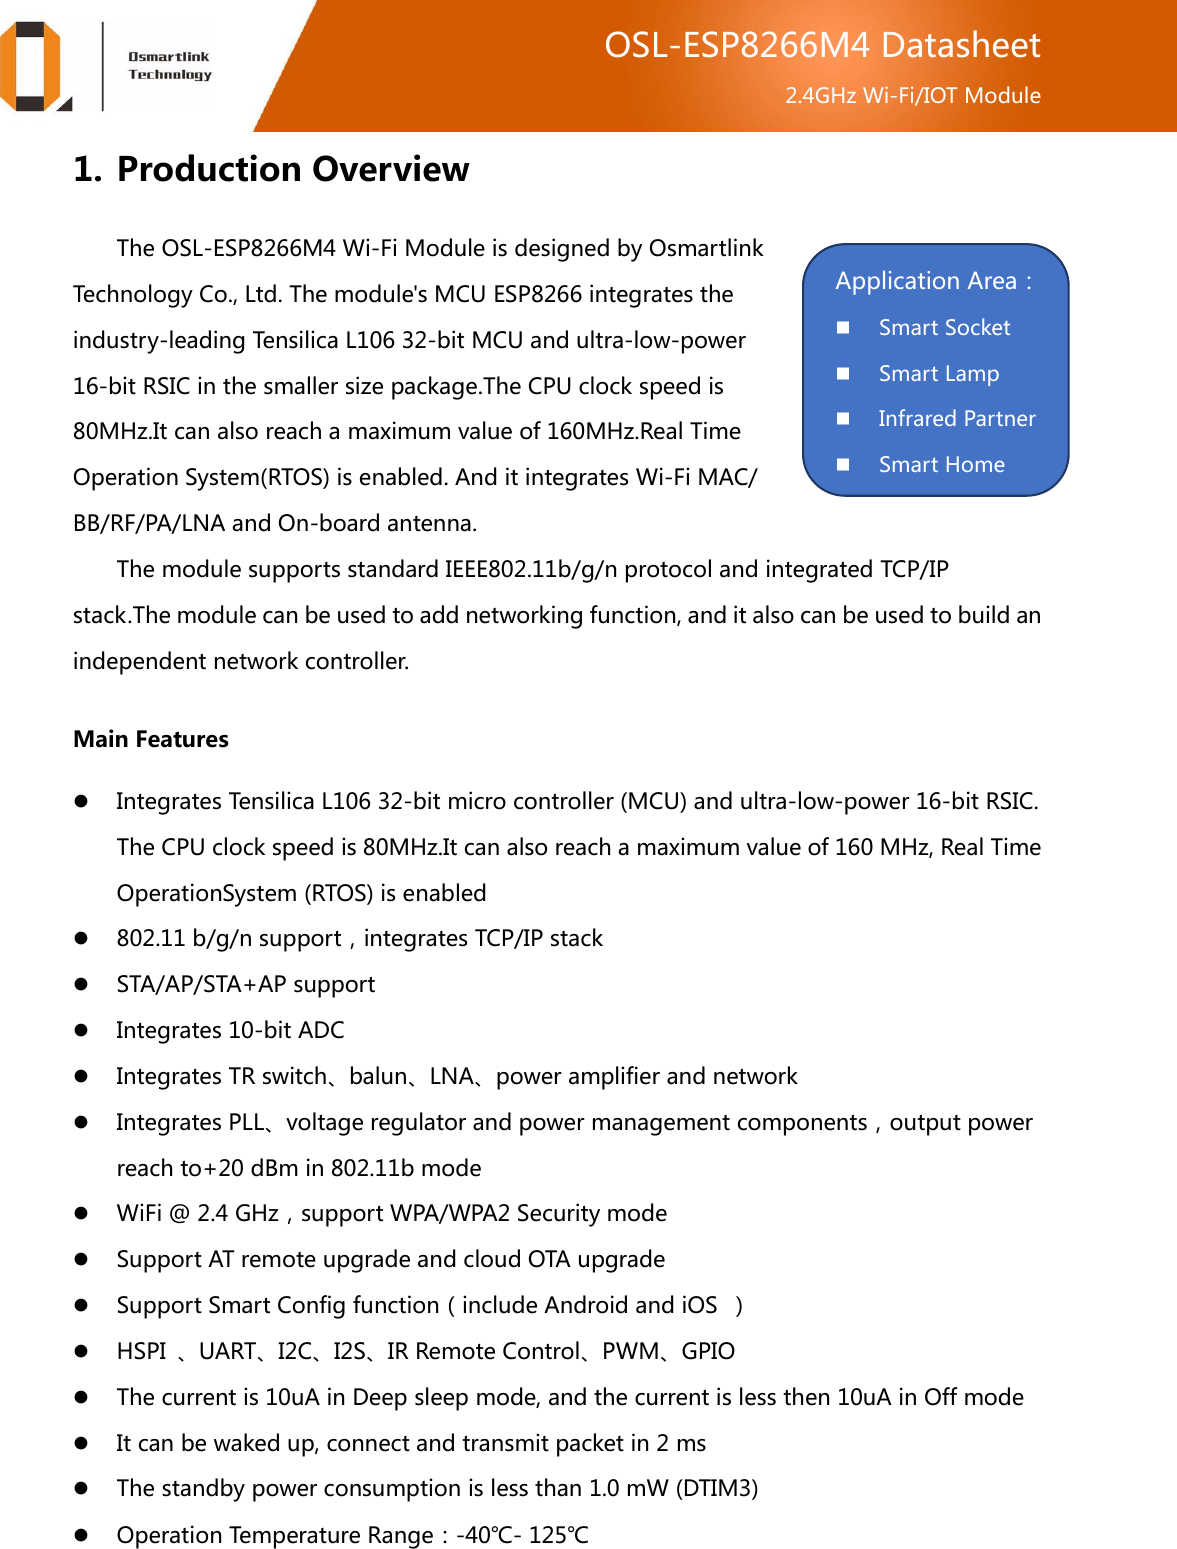  OSL-ESP8266M4 Datasheet 2.4GHz Wi-Fi/IOT Module 1. Production Overview The OSL-ESP8266M4 Wi-Fi Module is designed by Osmartlink Technology Co., Ltd. The module&apos;s MCU ESP8266 integrates the industry-leading Tensilica L106 32-bit MCU and ultra-low-power 16-bit RSIC in the smaller size package.The CPU clock speed is 80MHz.It can also reach a maximum value of 160MHz.Real Time Operation System(RTOS) is enabled. And it integrates Wi-Fi MAC/ BB/RF/PA/LNA and On-board antenna. The module supports standard IEEE802.11b/g/n protocol and integrated TCP/IP stack.The module can be used to add networking function, and it also can be used to build an independent network controller. Main Features  Integrates Tensilica L106 32-bit micro controller (MCU) and ultra-low-power 16-bit RSIC. The CPU clock speed is 80MHz.It can also reach a maximum value of 160 MHz, Real Time OperationSystem (RTOS) is enabled  802.11 b/g/n support，integrates TCP/IP stack  STA/AP/STA+AP support  Integrates 10-bit ADC  Integrates TR switch、balun、LNA、power amplifier and network  Integrates PLL、voltage regulator and power management components，output power reach to+20 dBm in 802.11b mode  WiFi @ 2.4 GHz，support WPA/WPA2 Security mode  Support AT remote upgrade and cloud OTA upgrade  Support Smart Config function（include Android and iOS  ）  HSPI  、UART、I2C、I2S、IR Remote Control、PWM、GPIO  The current is 10uA in Deep sleep mode, and the current is less then 10uA in Off mode  It can be waked up, connect and transmit packet in 2 ms  The standby power consumption is less than 1.0 mW (DTIM3)  Operation Temperature Range：-40℃- 125℃  Application Area：  Smart Socket  Smart Lamp  Infrared Partner  Smart Home 第三方 